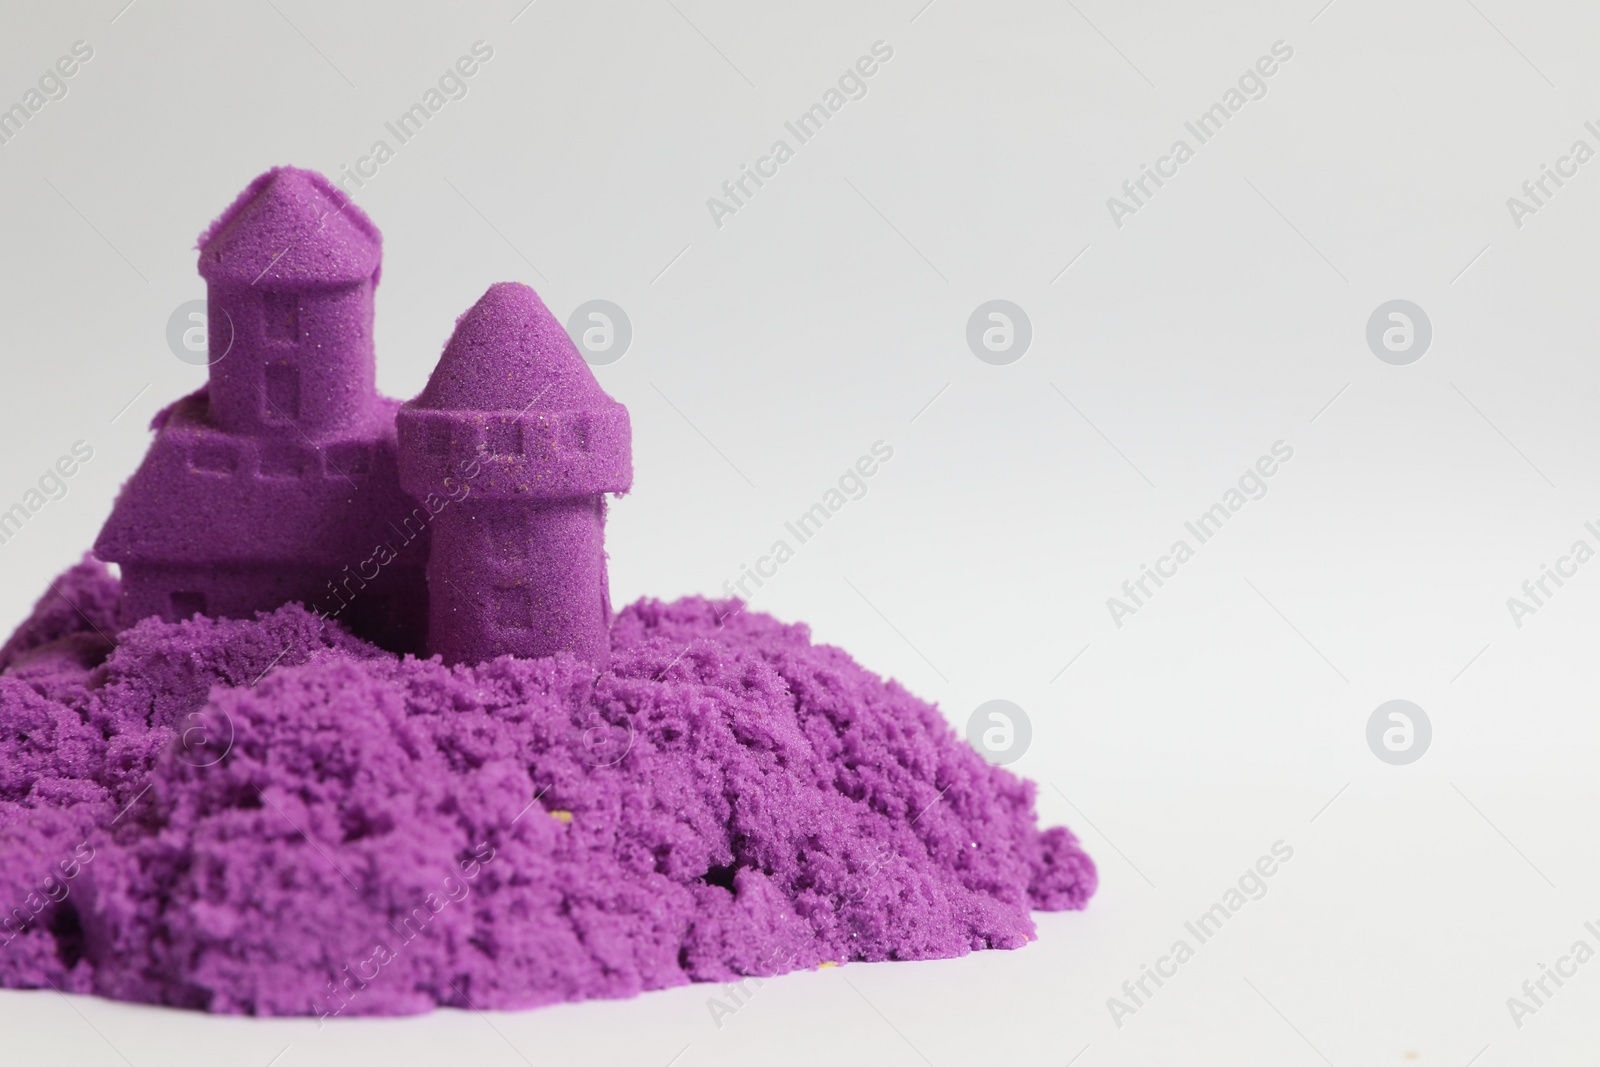 Photo of Castle made of purple kinetic sand on white background. Space for text